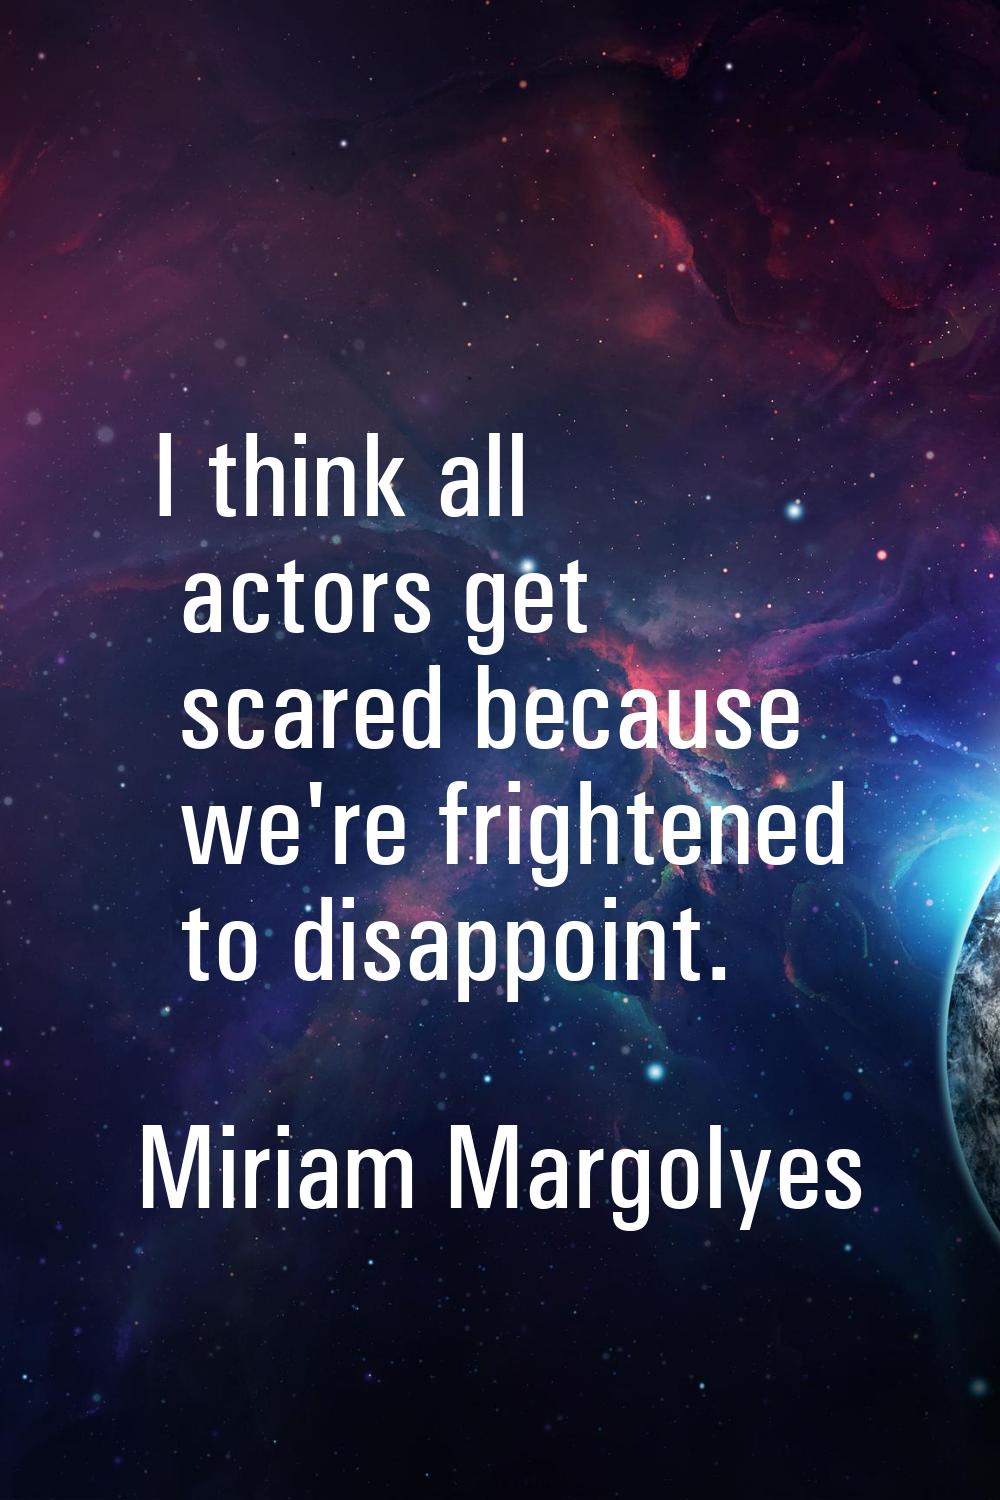 I think all actors get scared because we're frightened to disappoint.